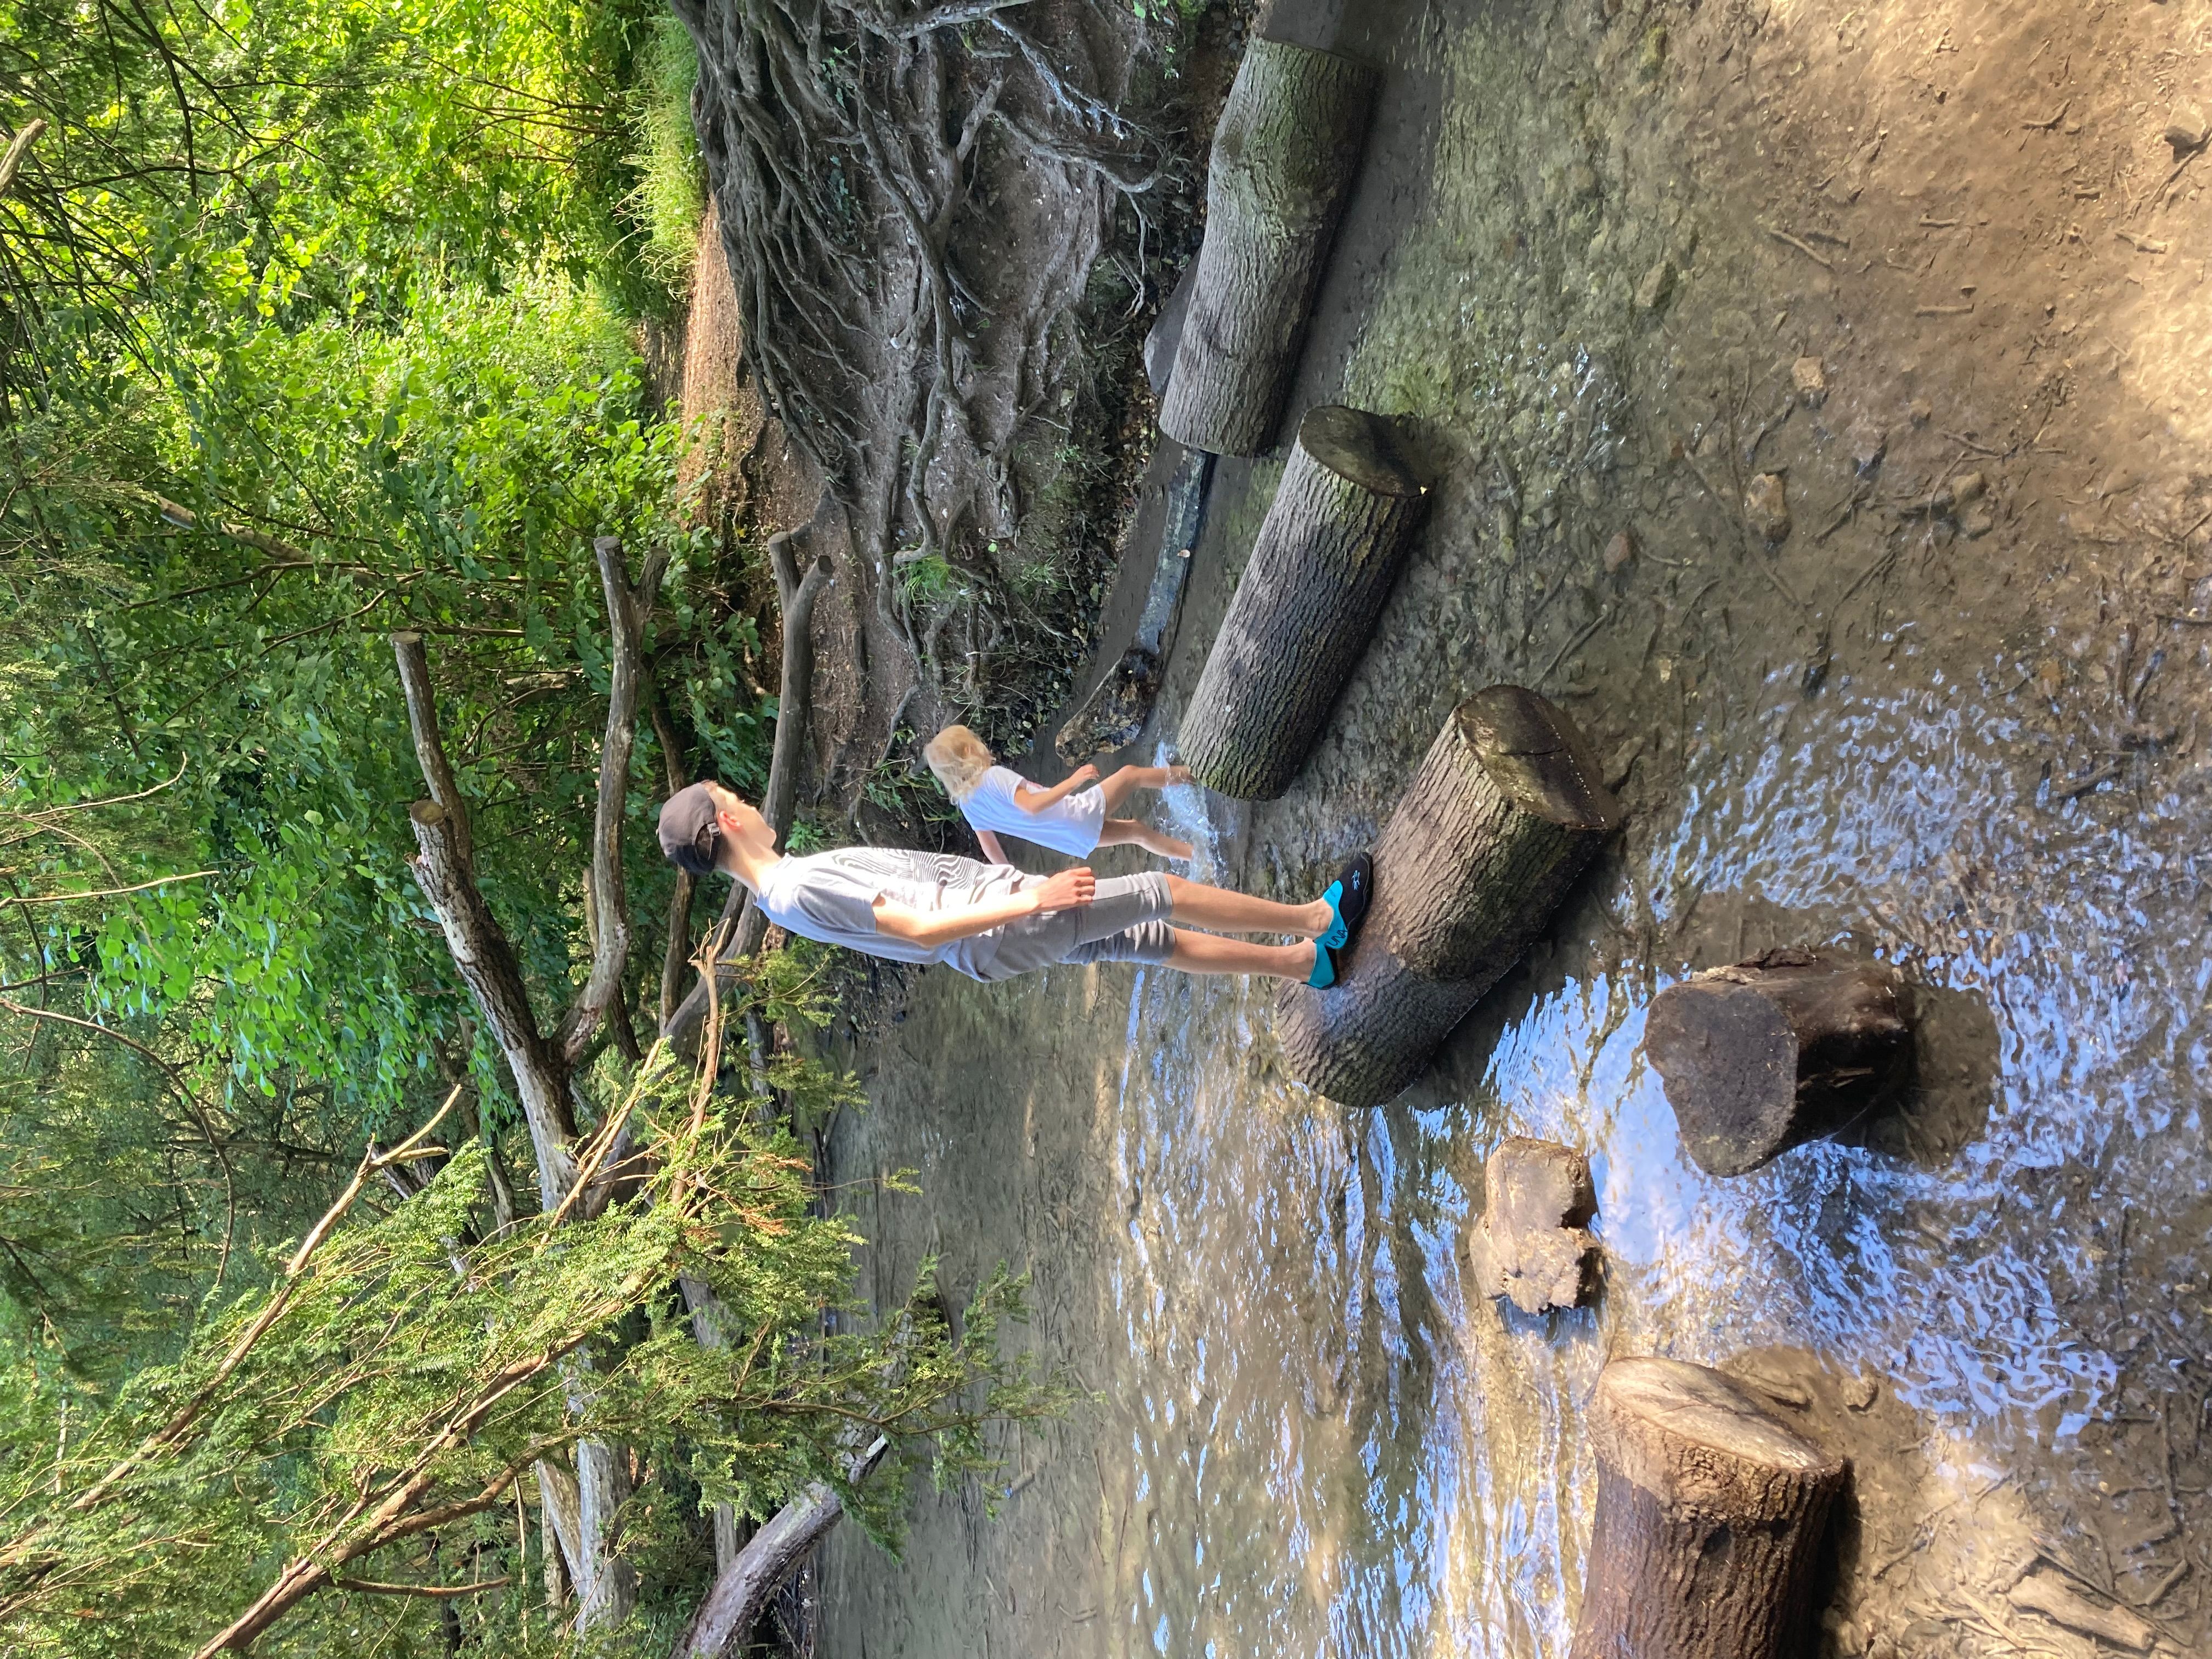 Jumping on logs in the stream